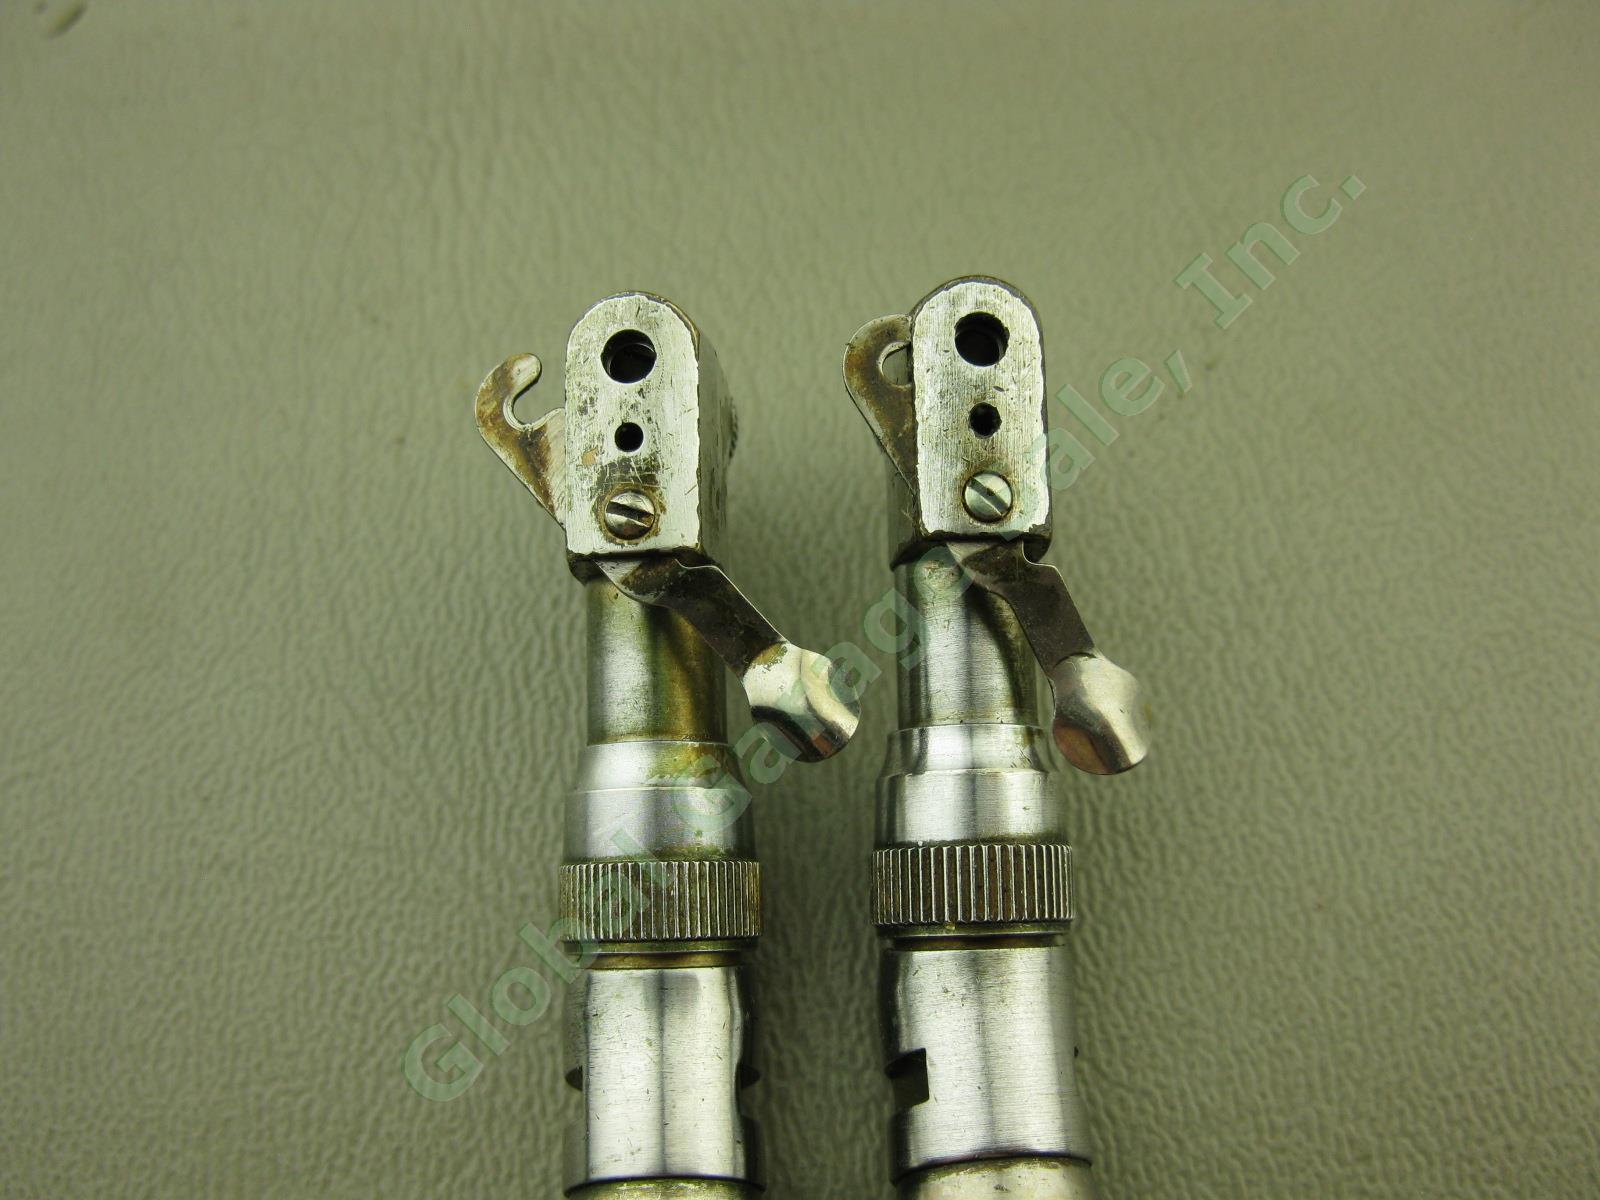 2 Contra Angle Attachments W/ Swing Latch Heads For Star Titan Dental Handpieces 8